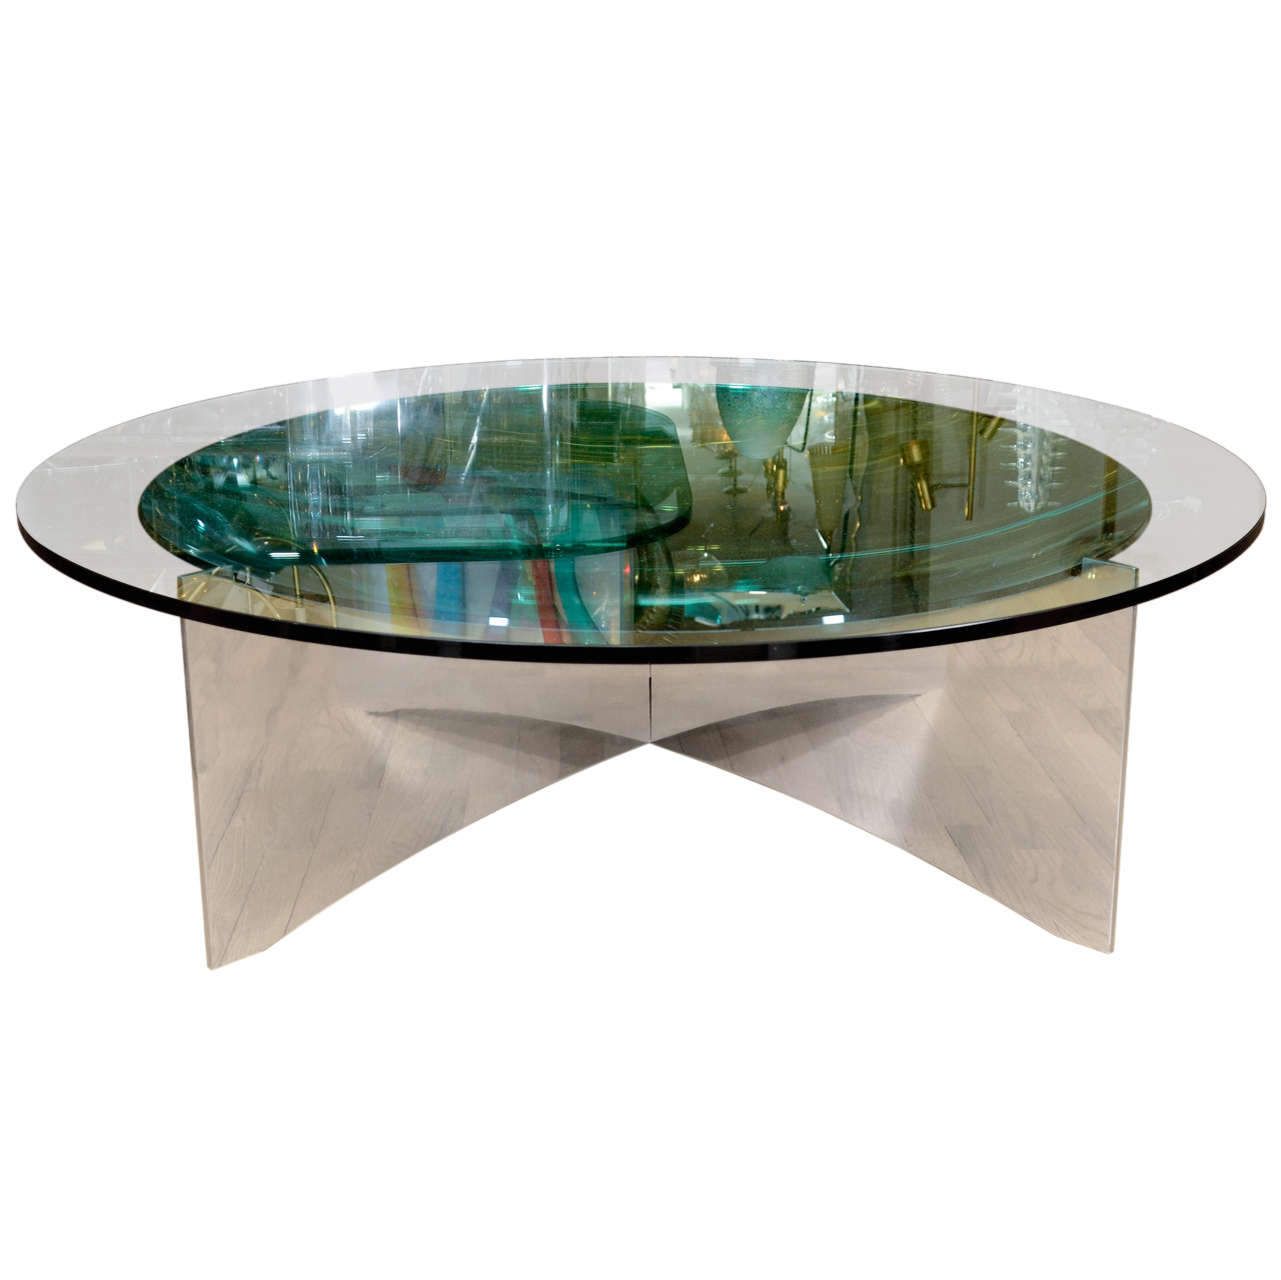 Unusual Concave Green Mercury Glass Coffee Table